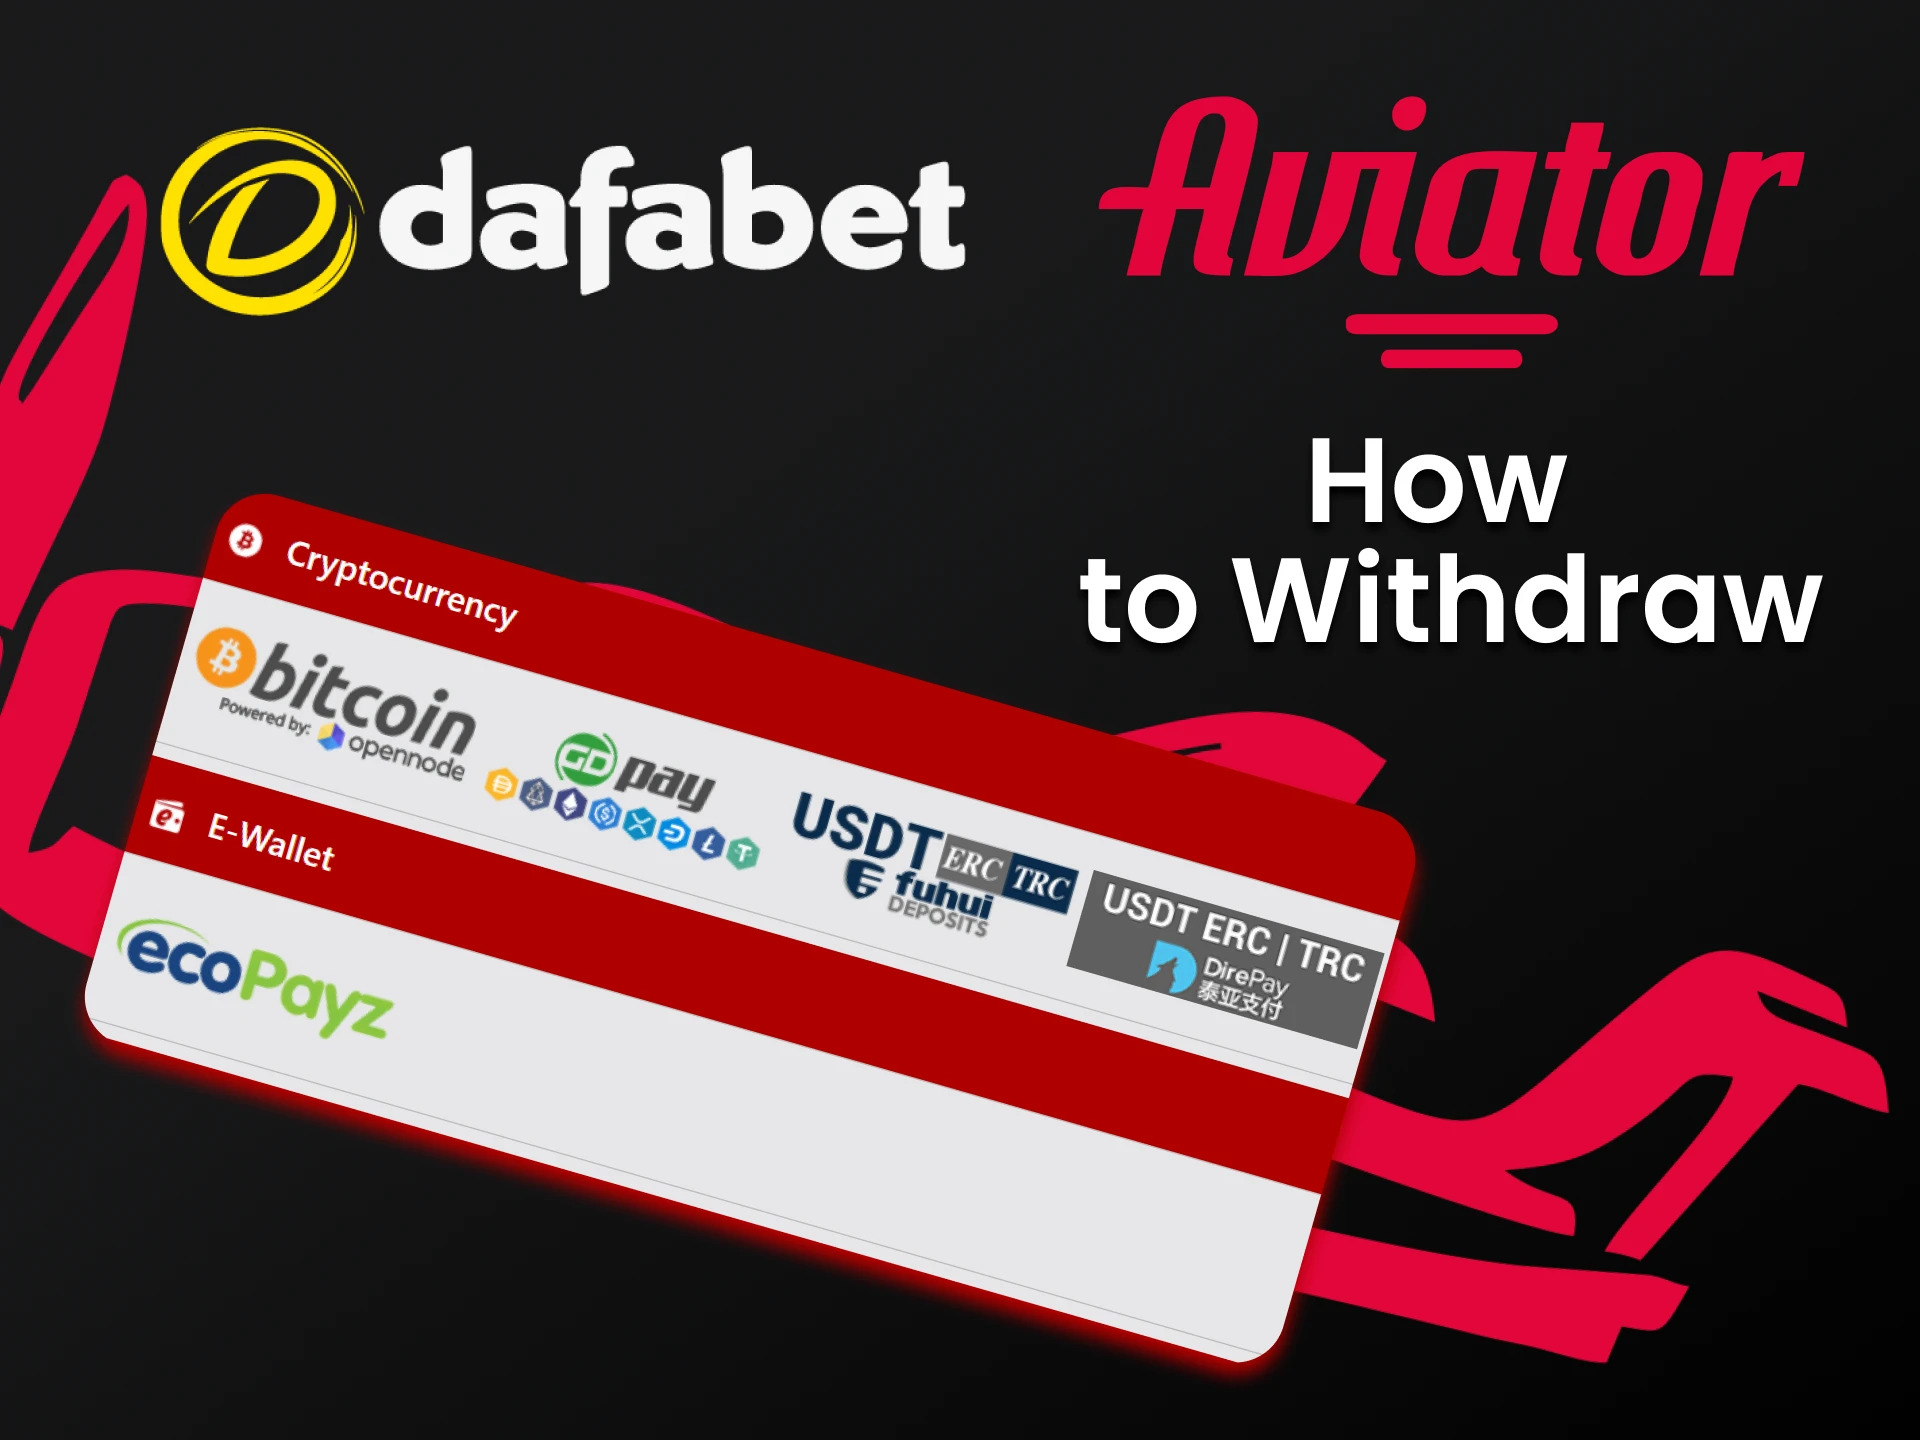 Withdraw your winnings in a convenient way from Dafabet.